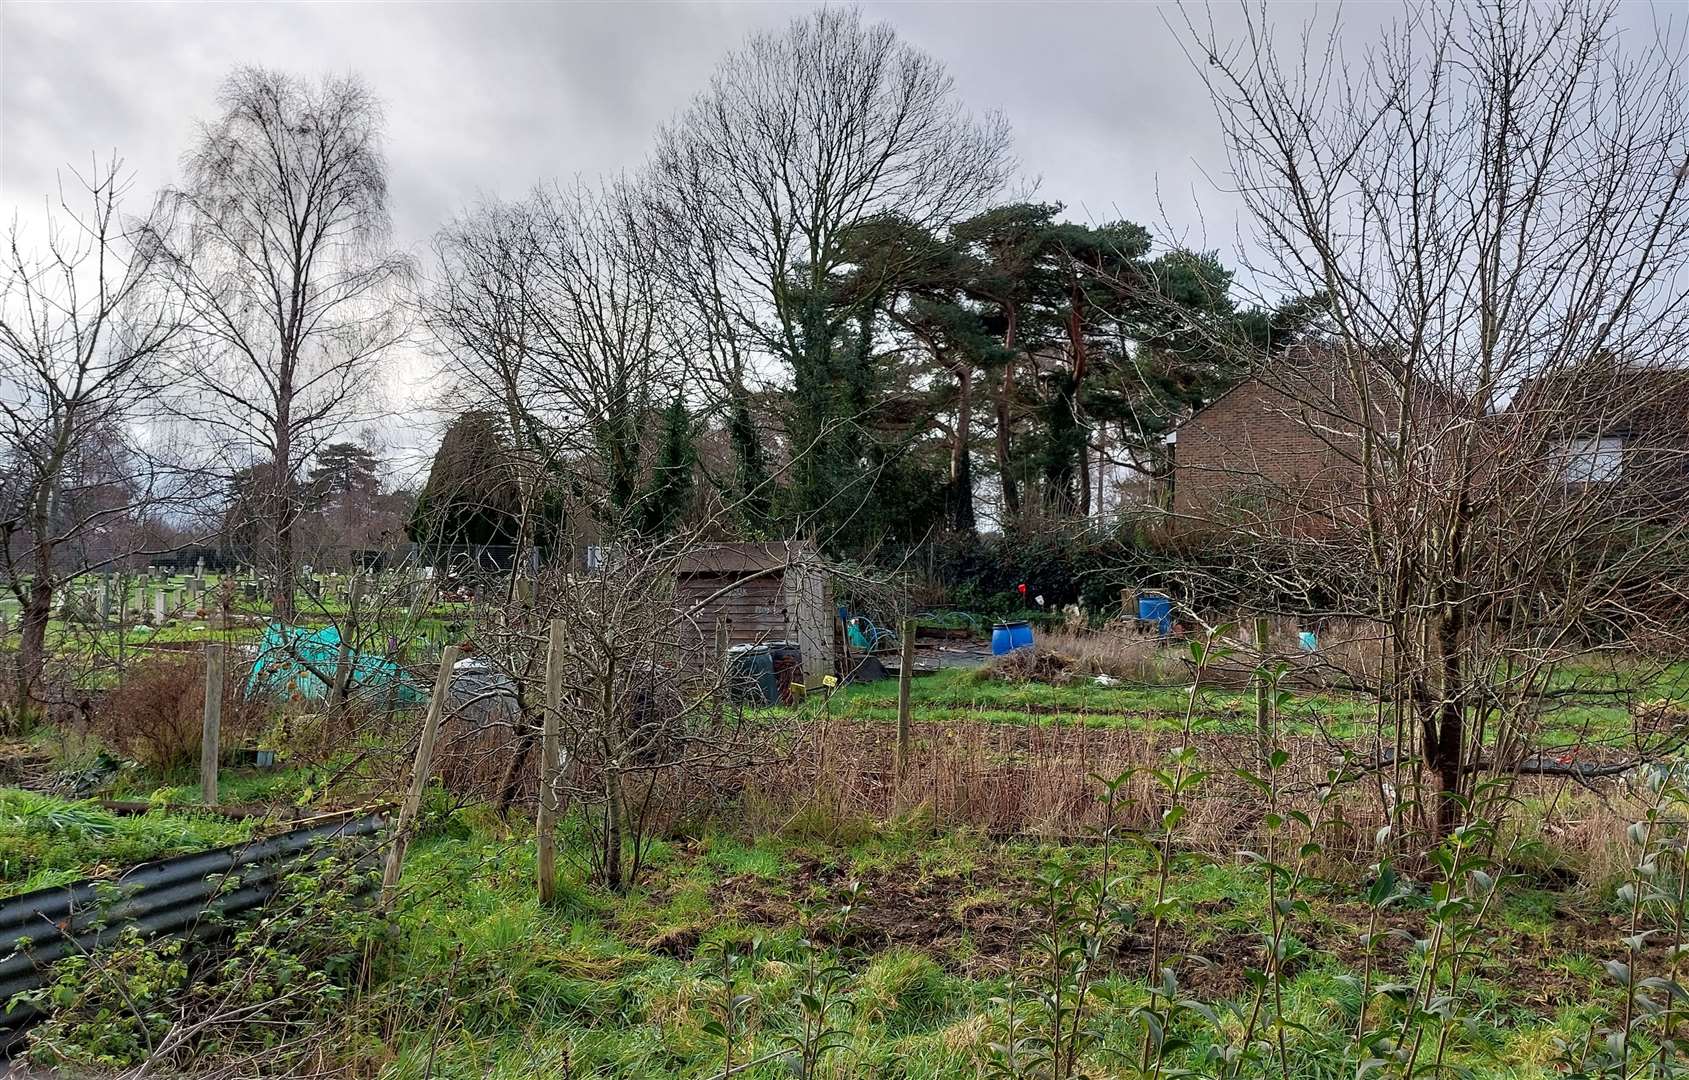 Kennington Community Council says prices would need to double again for the allotments to break even